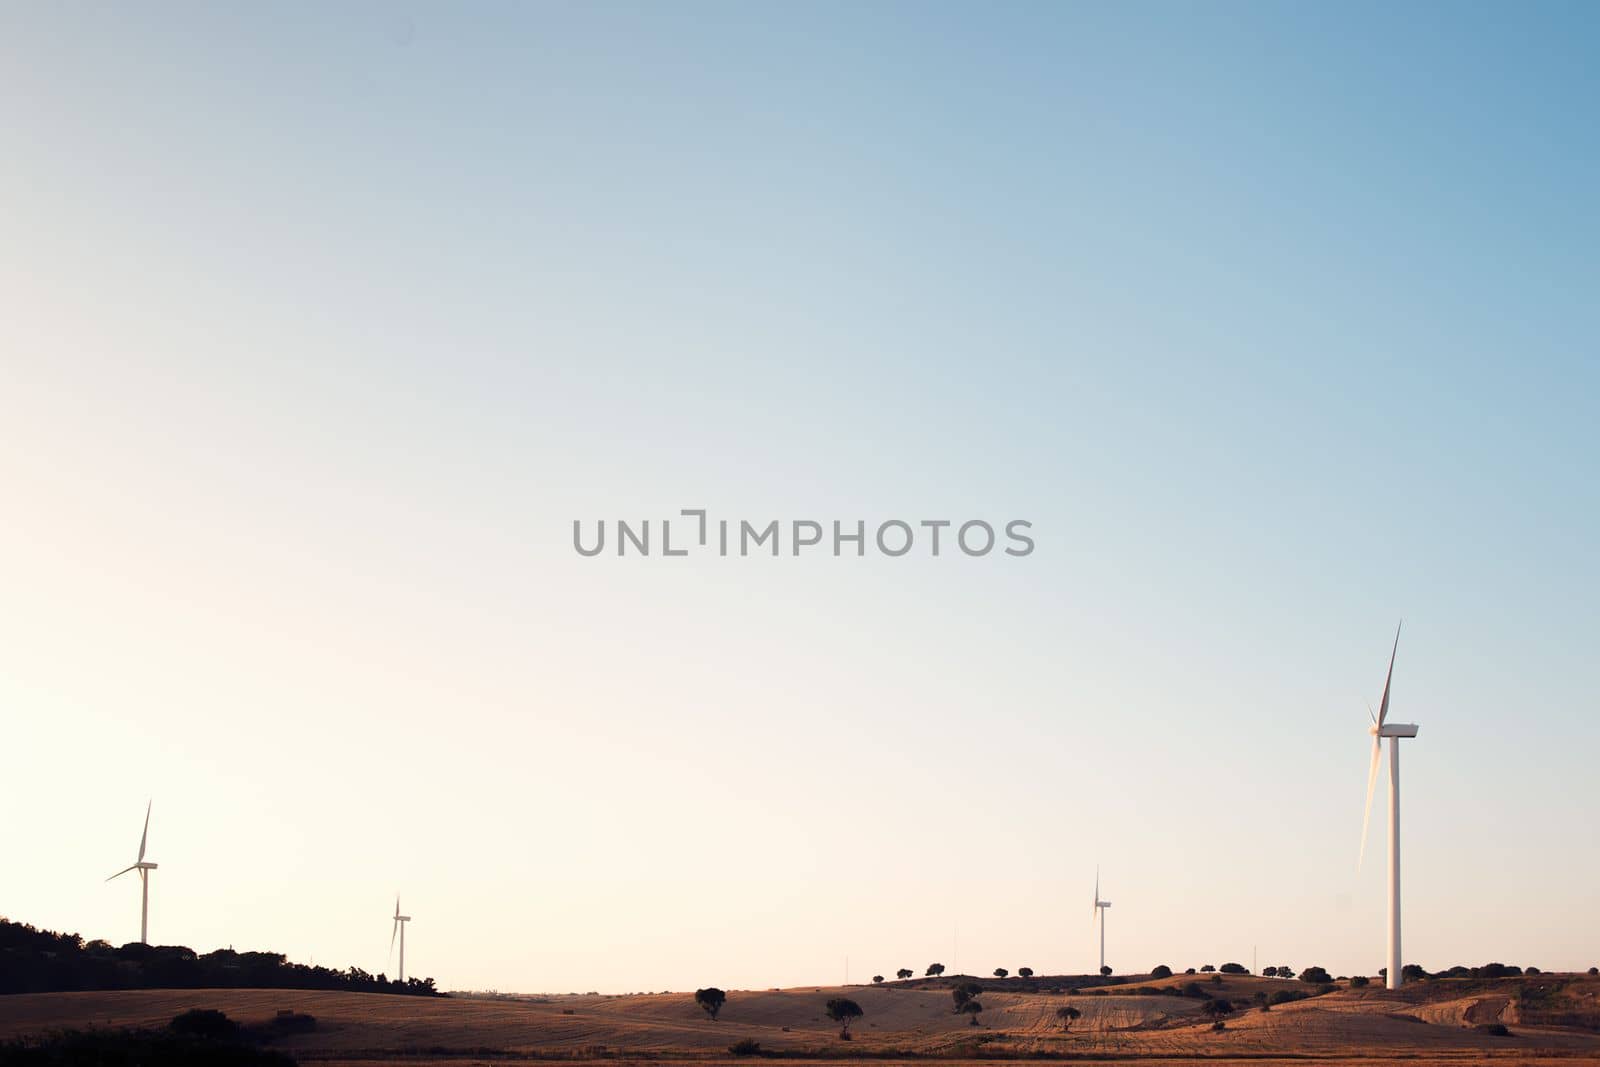 Four windmills produce clean energy in a wind farm at dusk. They are in a rural environment surrounded by crops and trees, the sky is clean and clear. Copy space